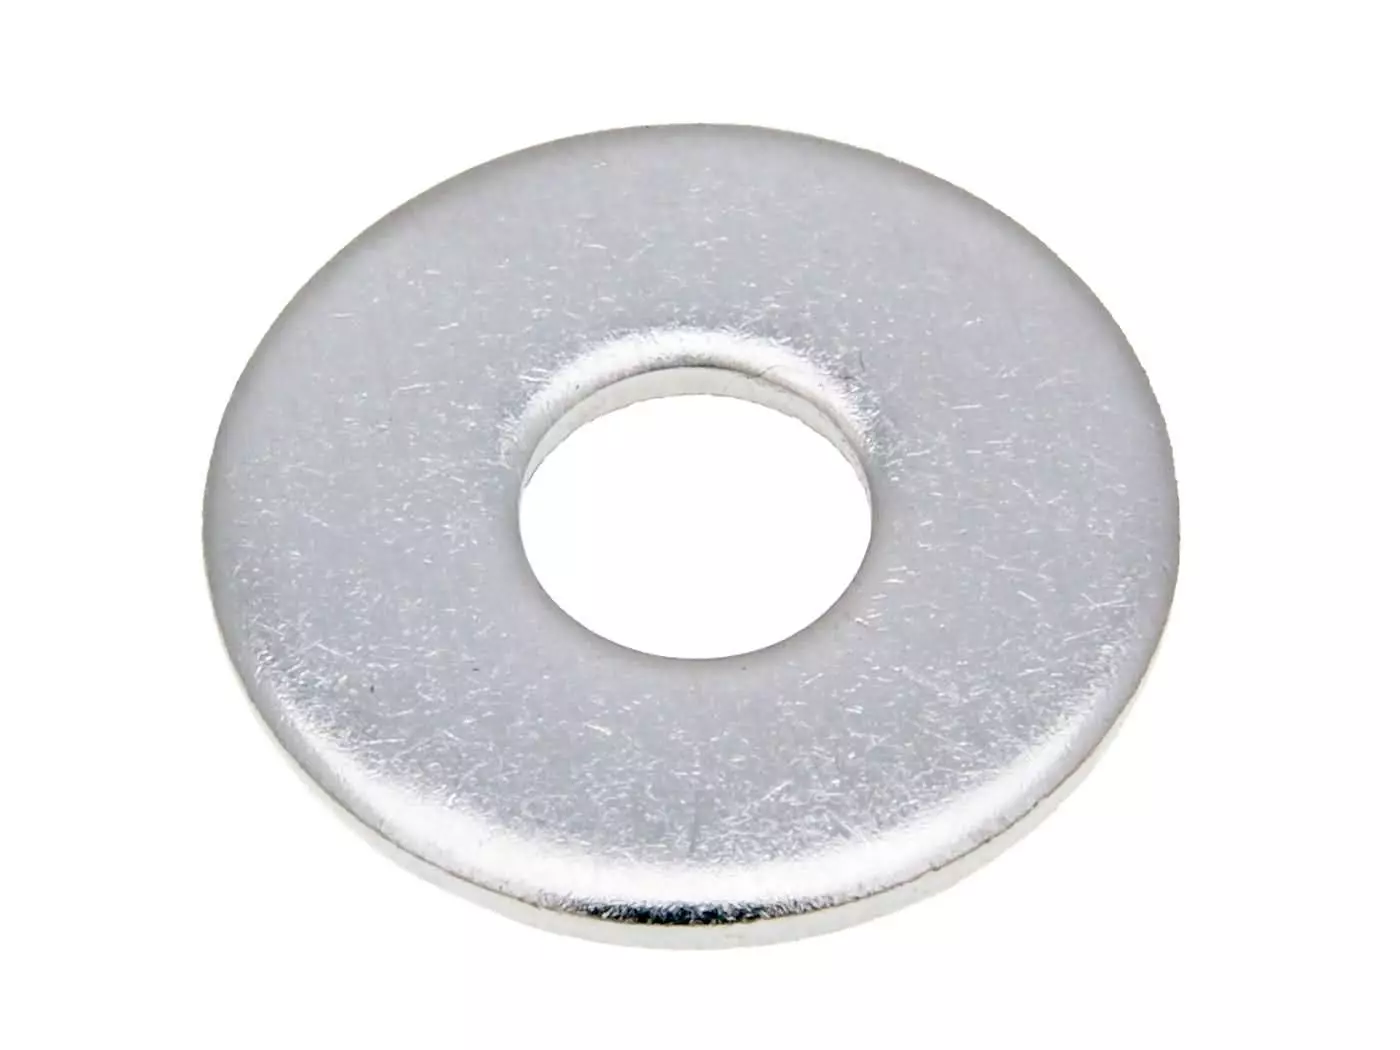 Large Diameter Washers DIN9021 8.4x24x2 M8 Stainless Steel A2 (100 Pcs)